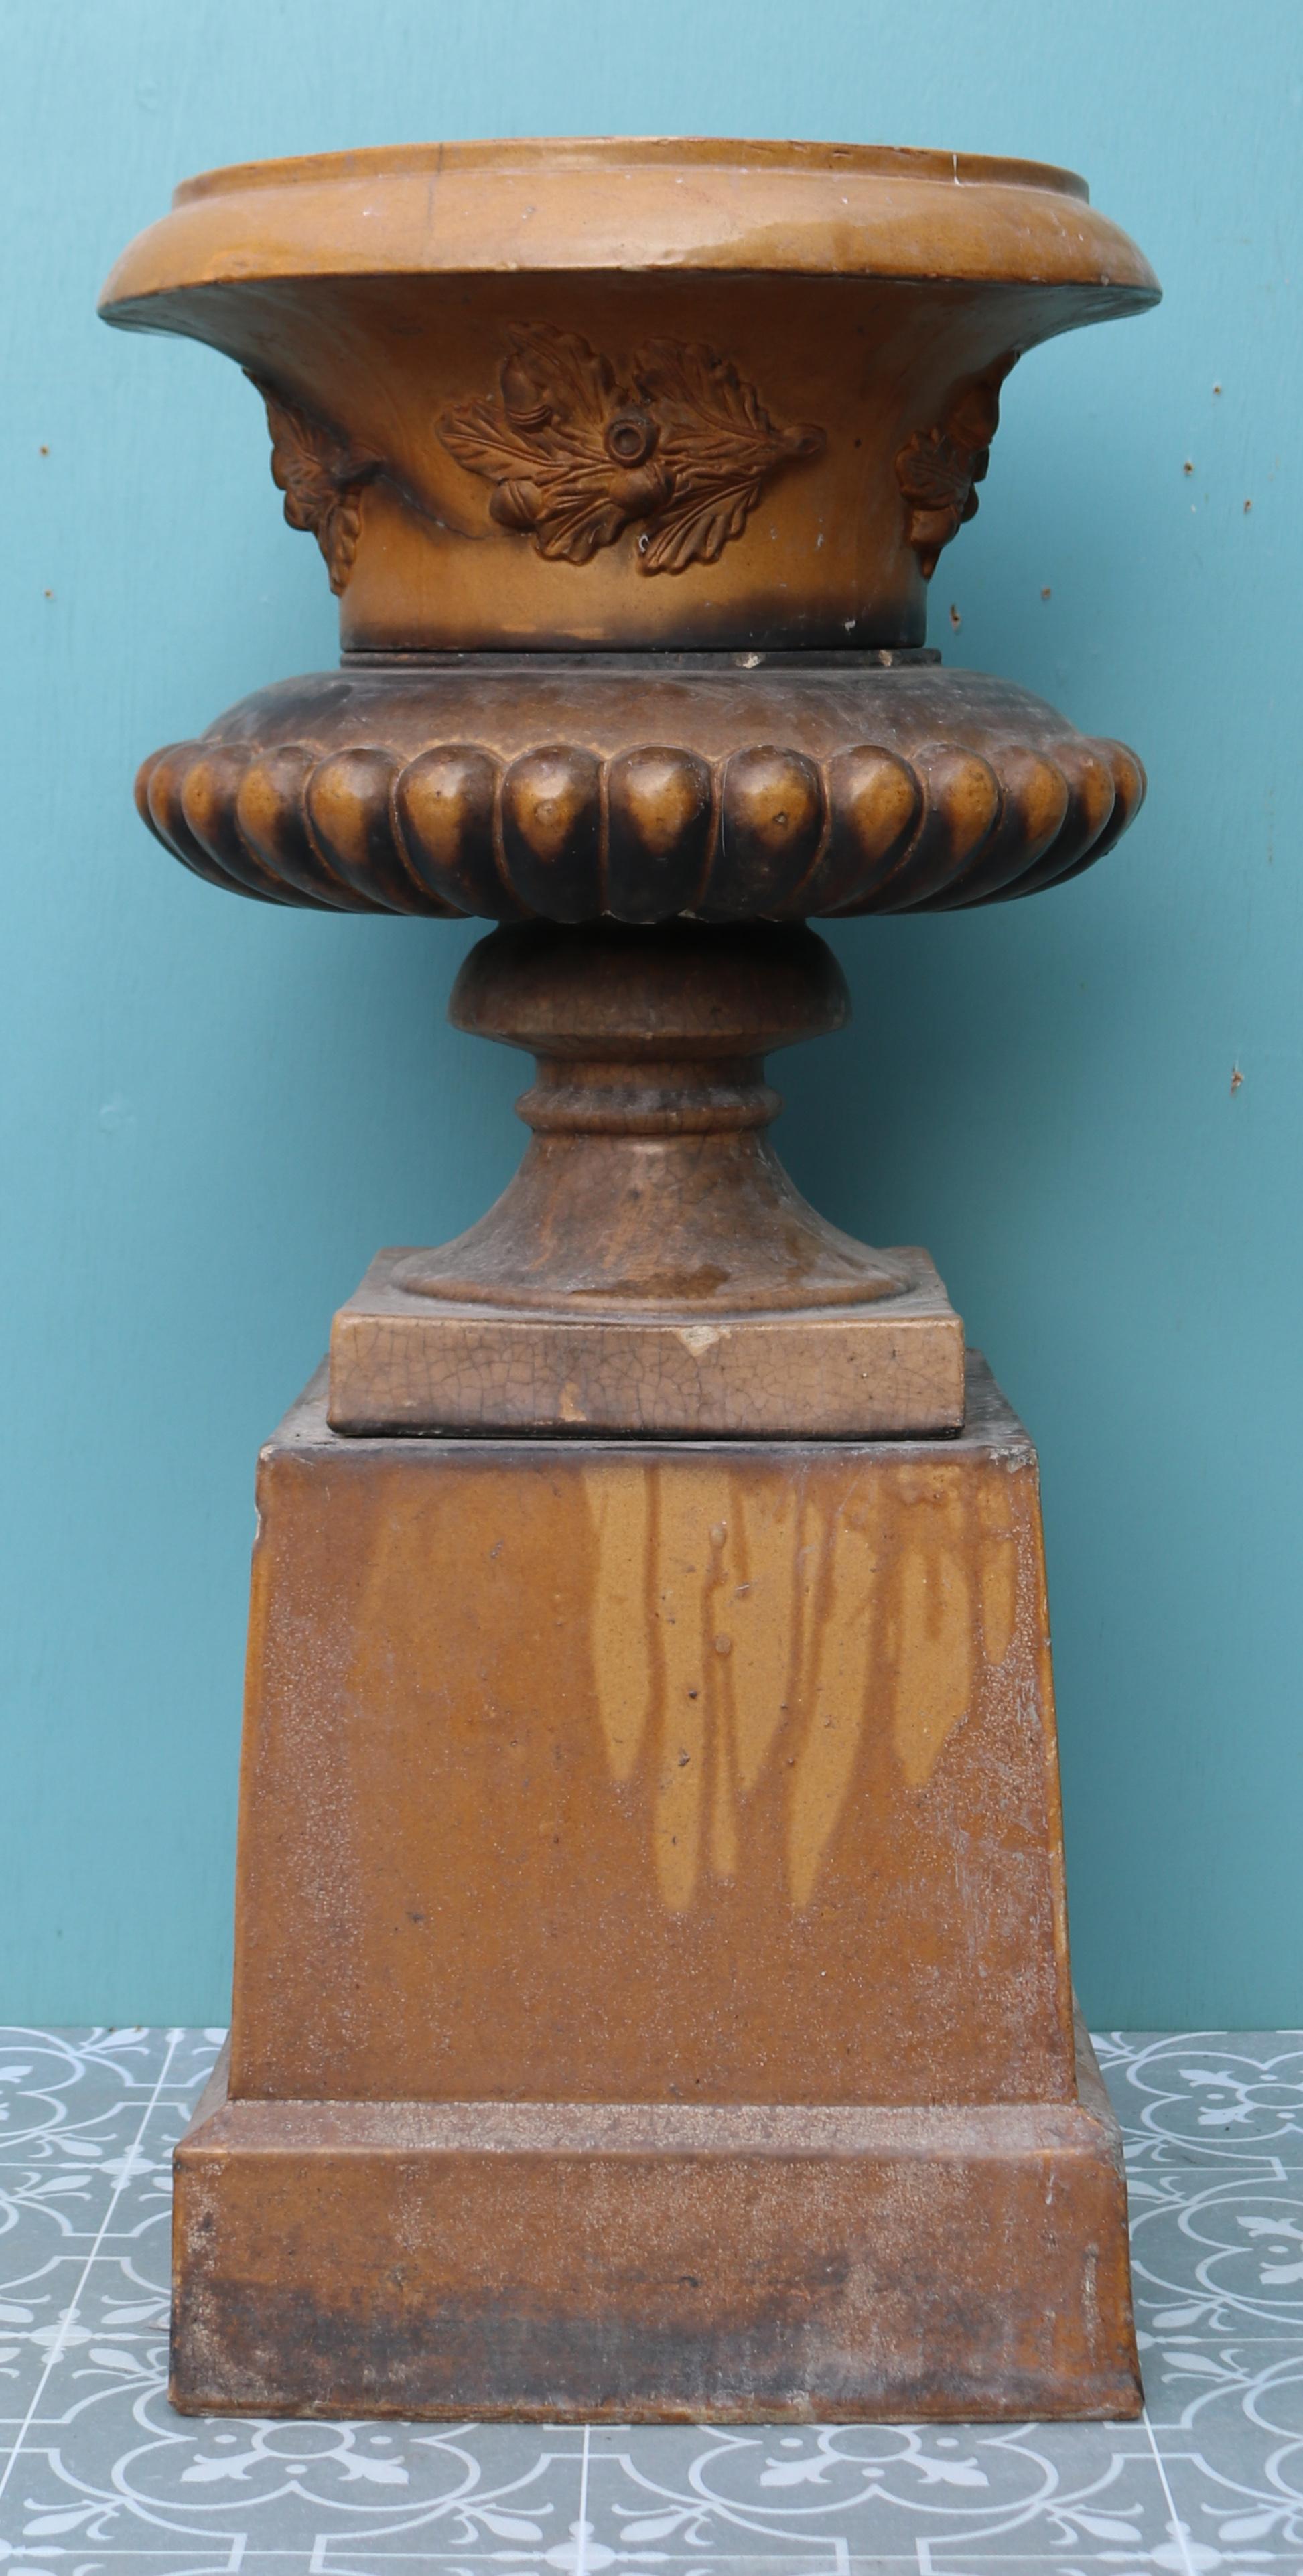 A Victorian style urn with cast acorn and leaf pattern and ‘treacle’ glaze finish.

Additional Dimensions 

Base 35 x 35 cm.